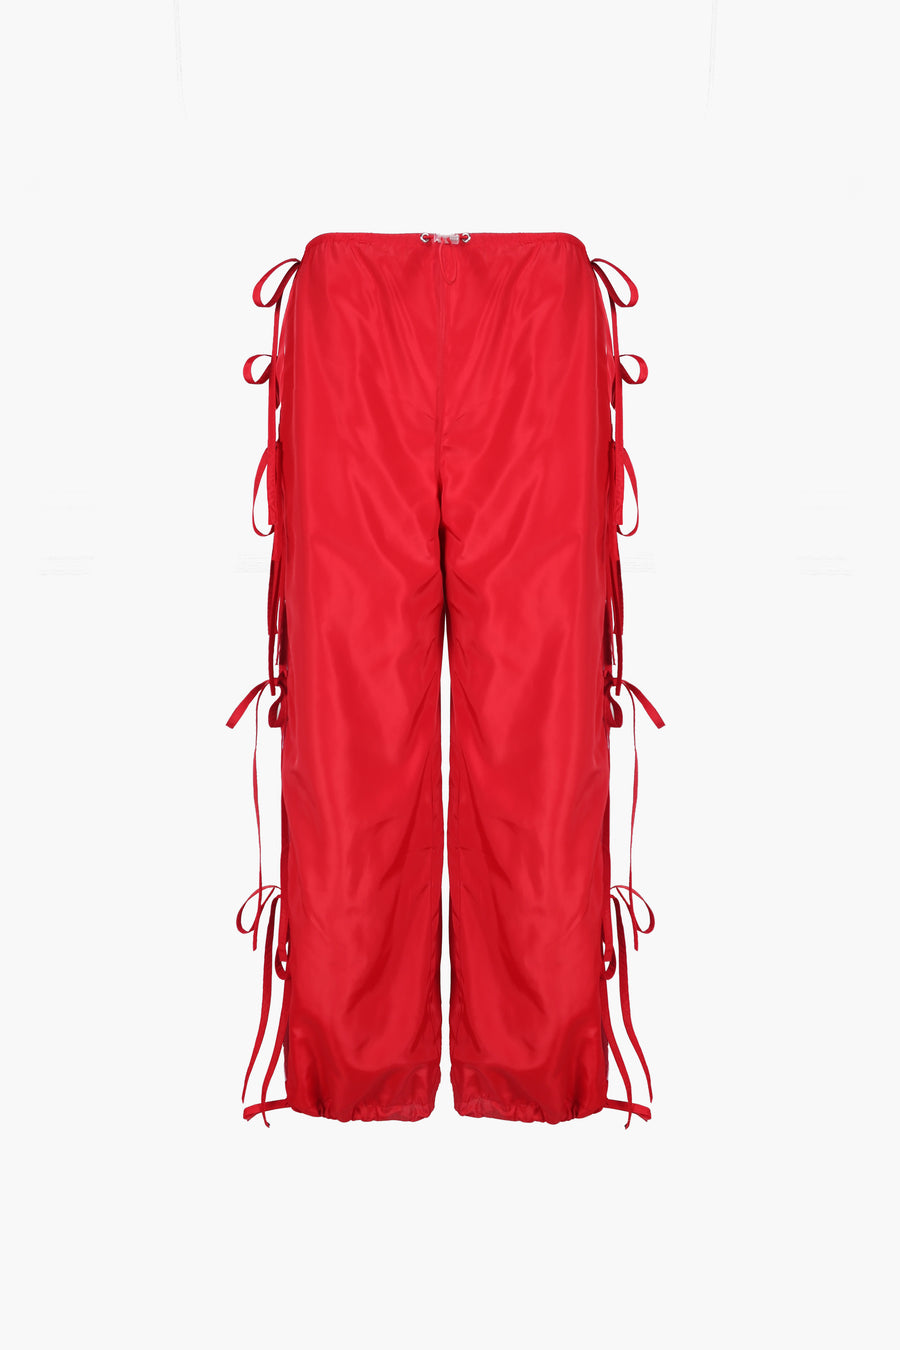 CAM PANT IN RED